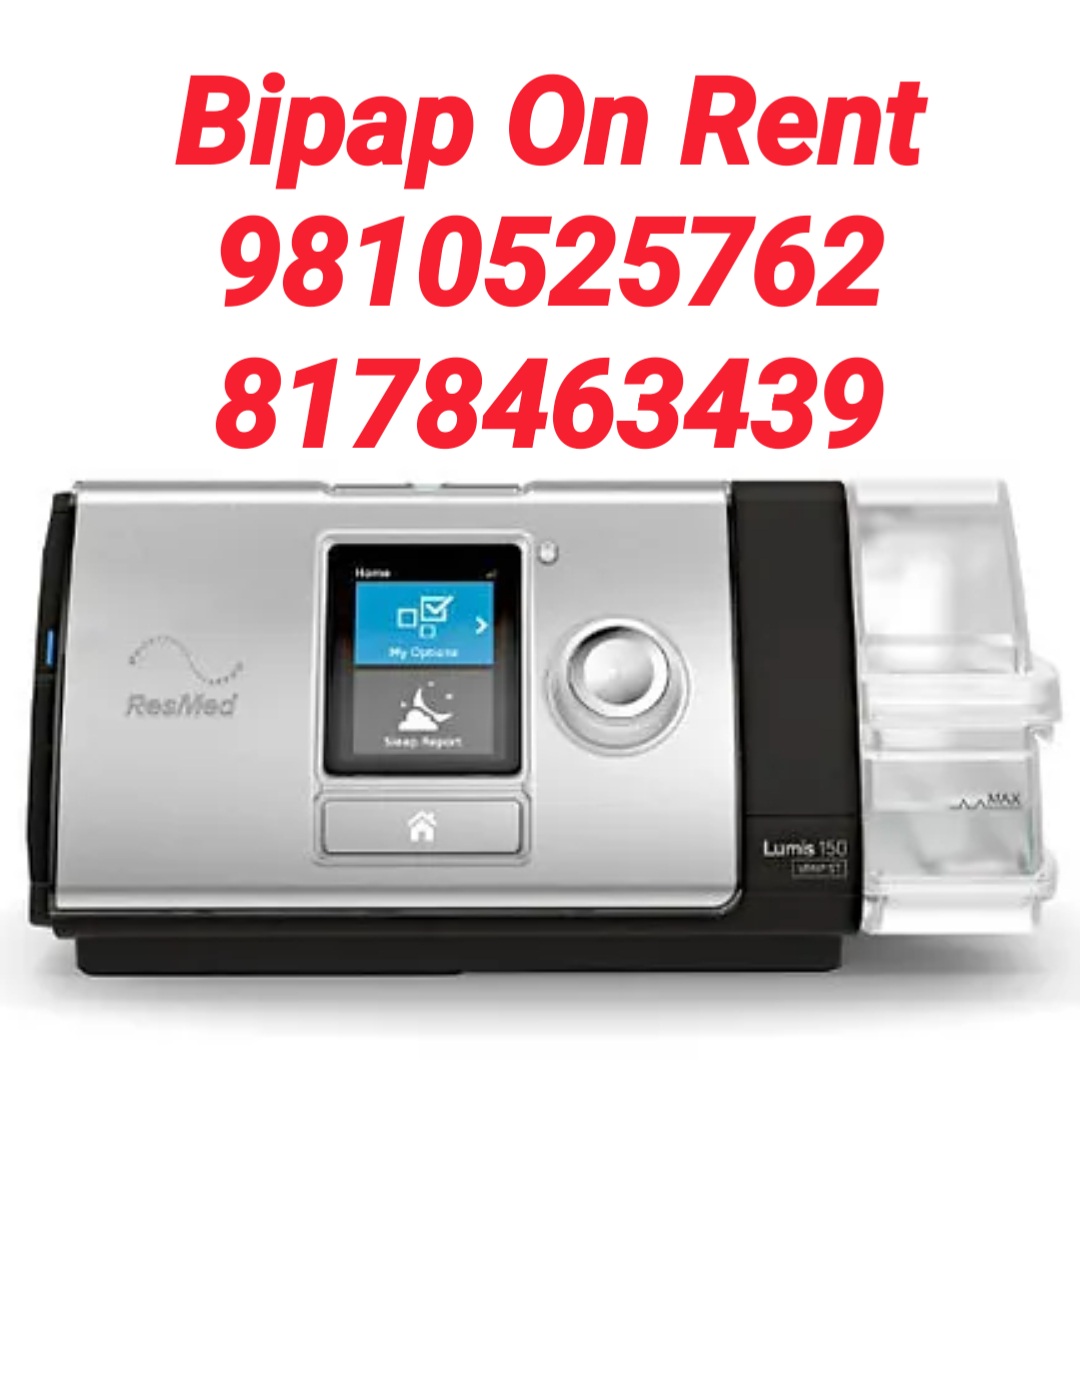 OXYGEN/BIPAP/CPAP/HOSPITAL BED/SUCTION ON RENT IN GHAZIABAD